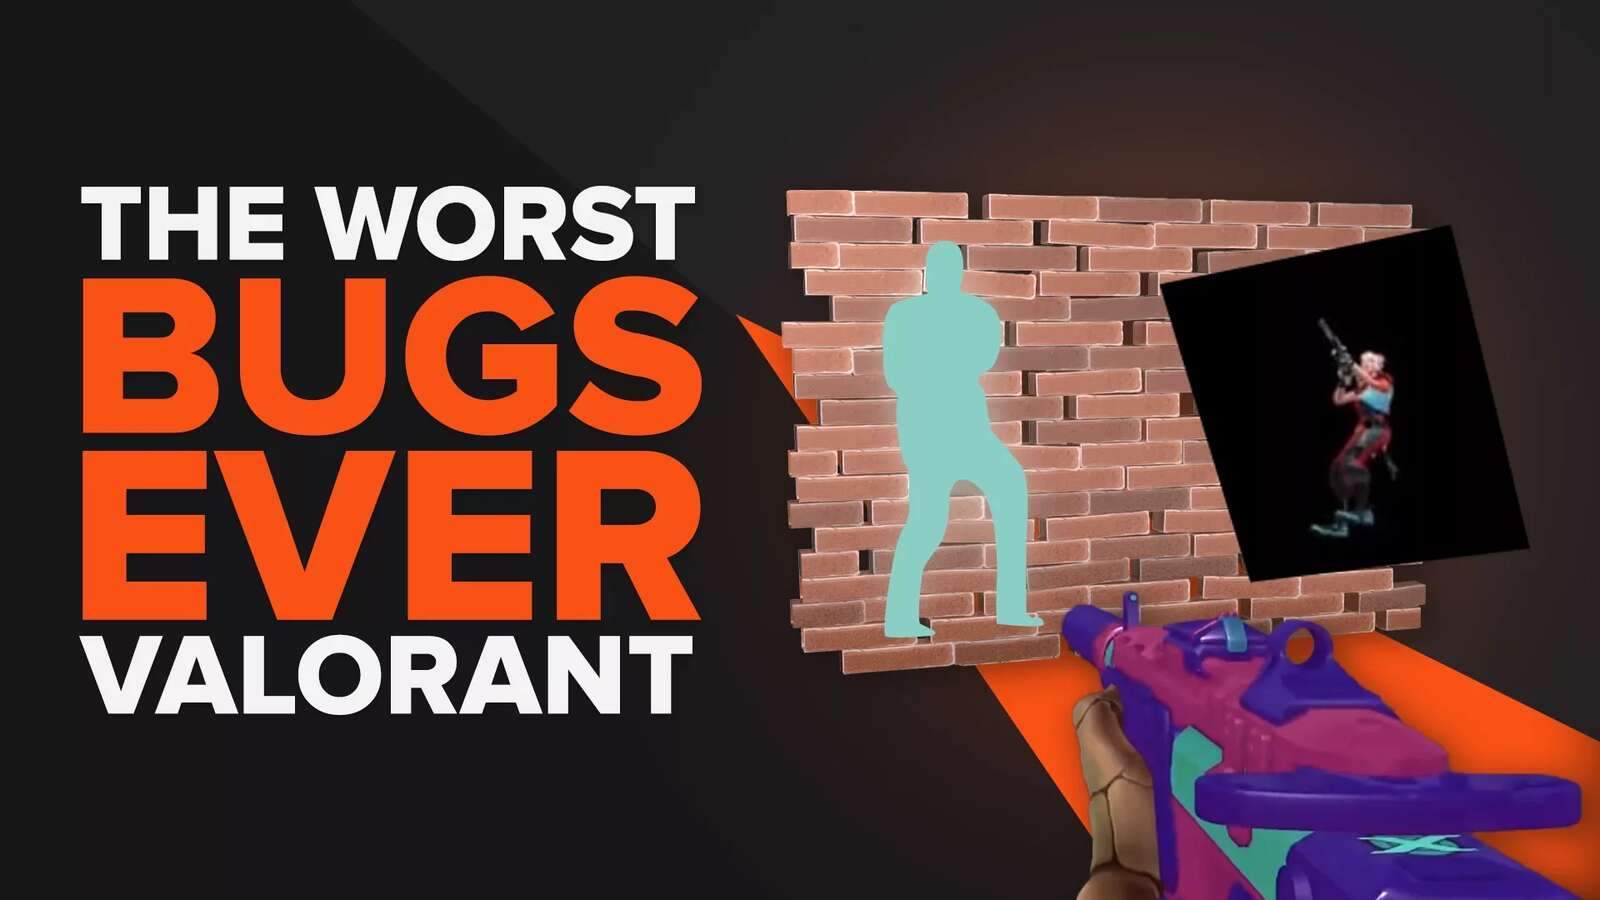 The Worst Bugs Ever in Valorant [Top 5 List]